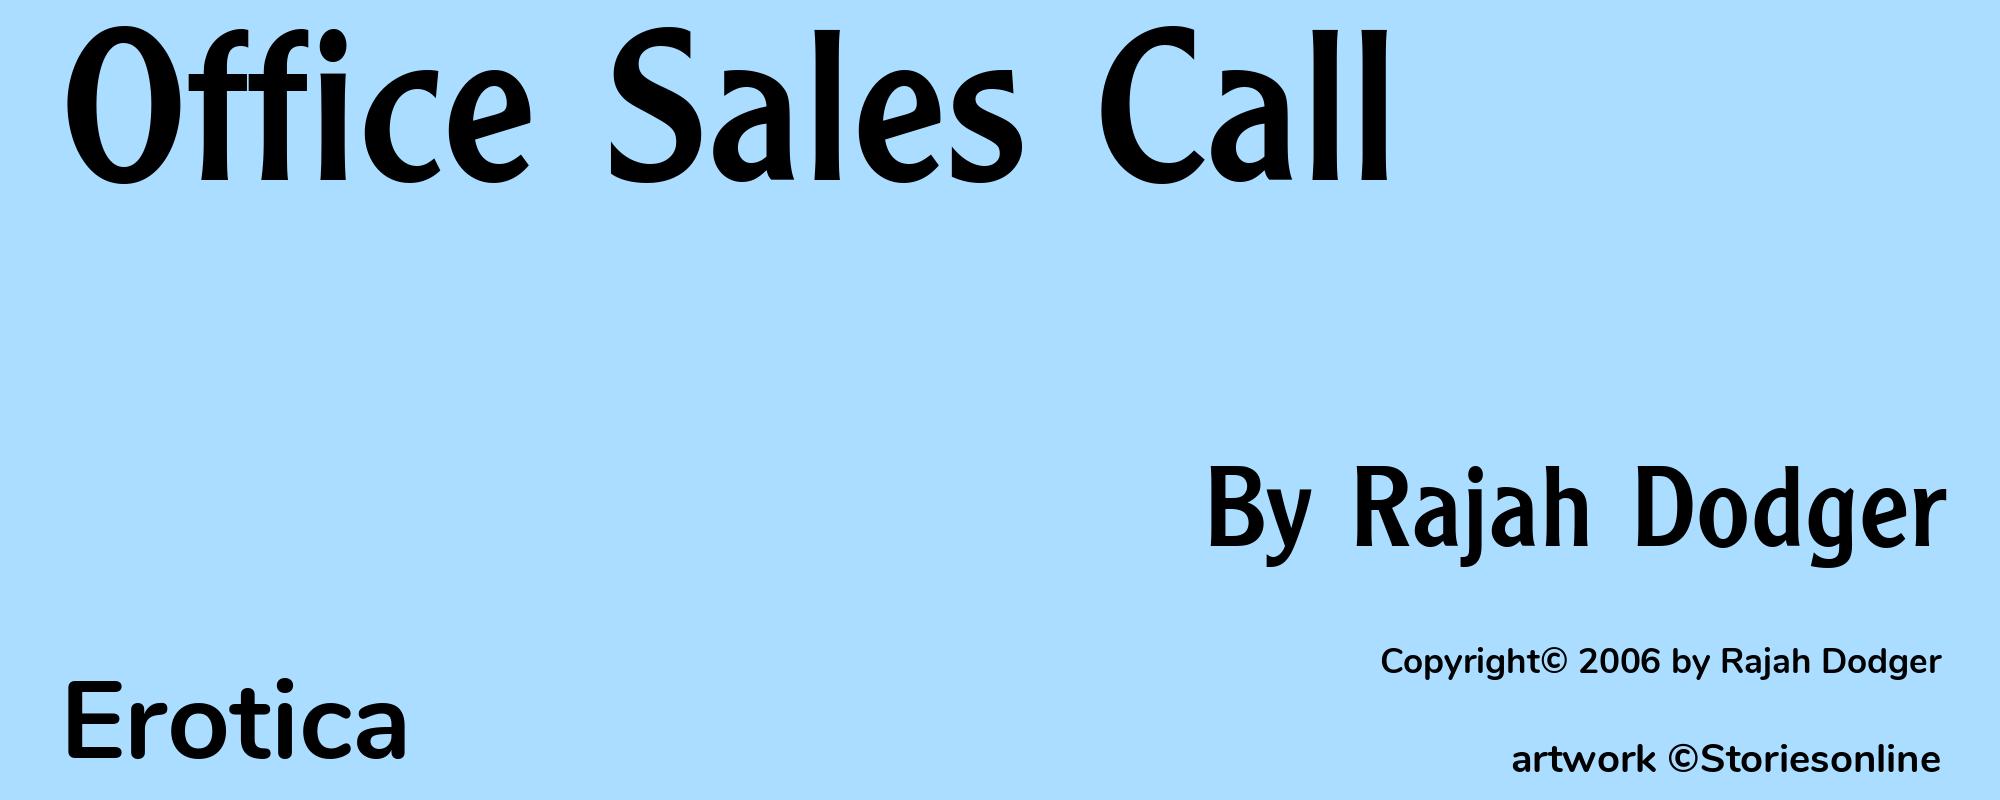 Office Sales Call - Cover